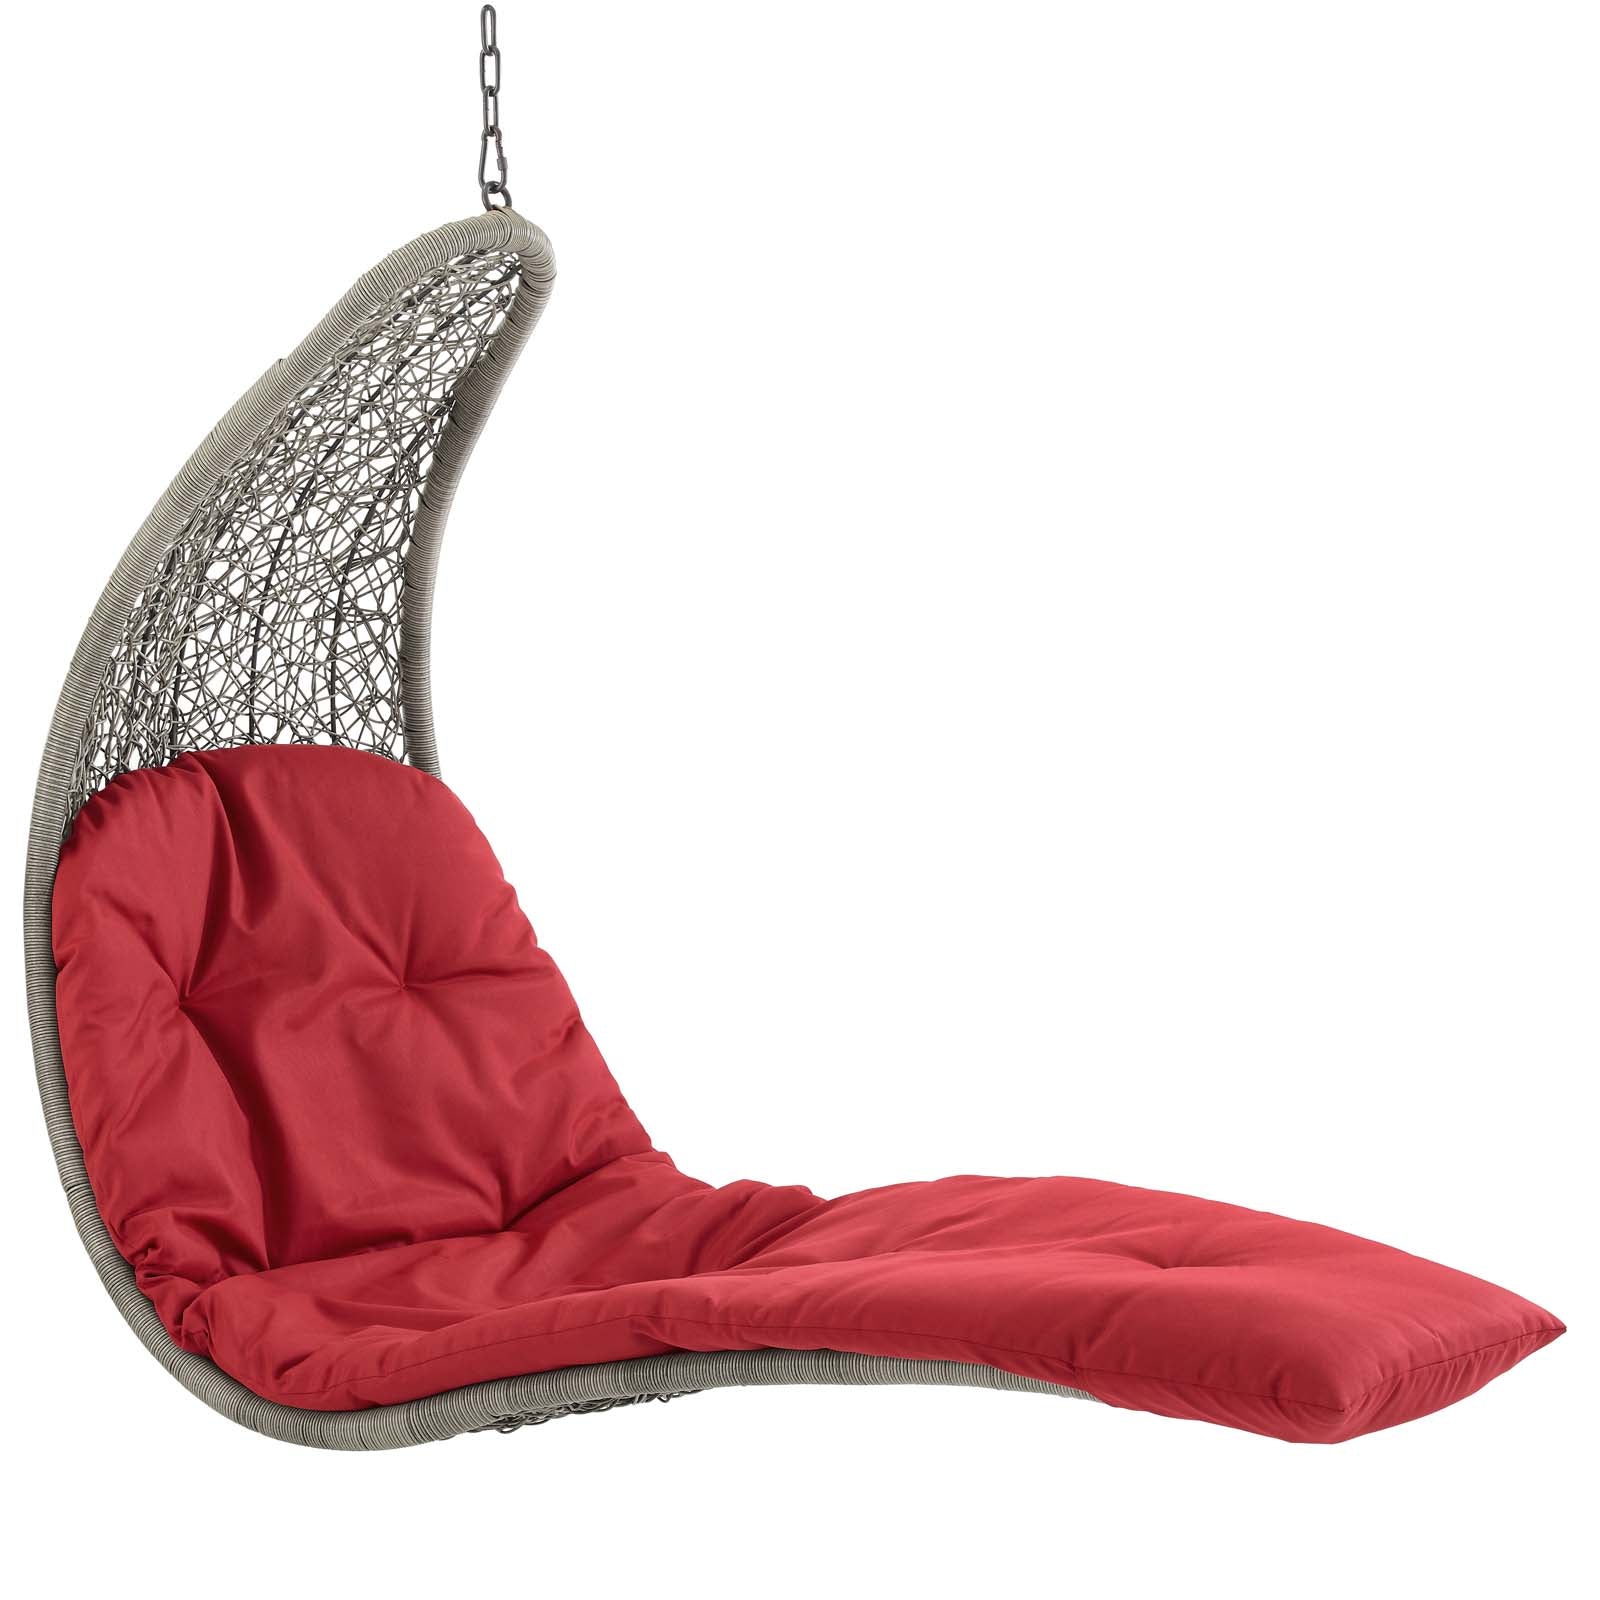 Modway Outdoor Swings - Landscape Hanging Chaise Lounge Outdoor Patio Swing Chair Light Gray Red